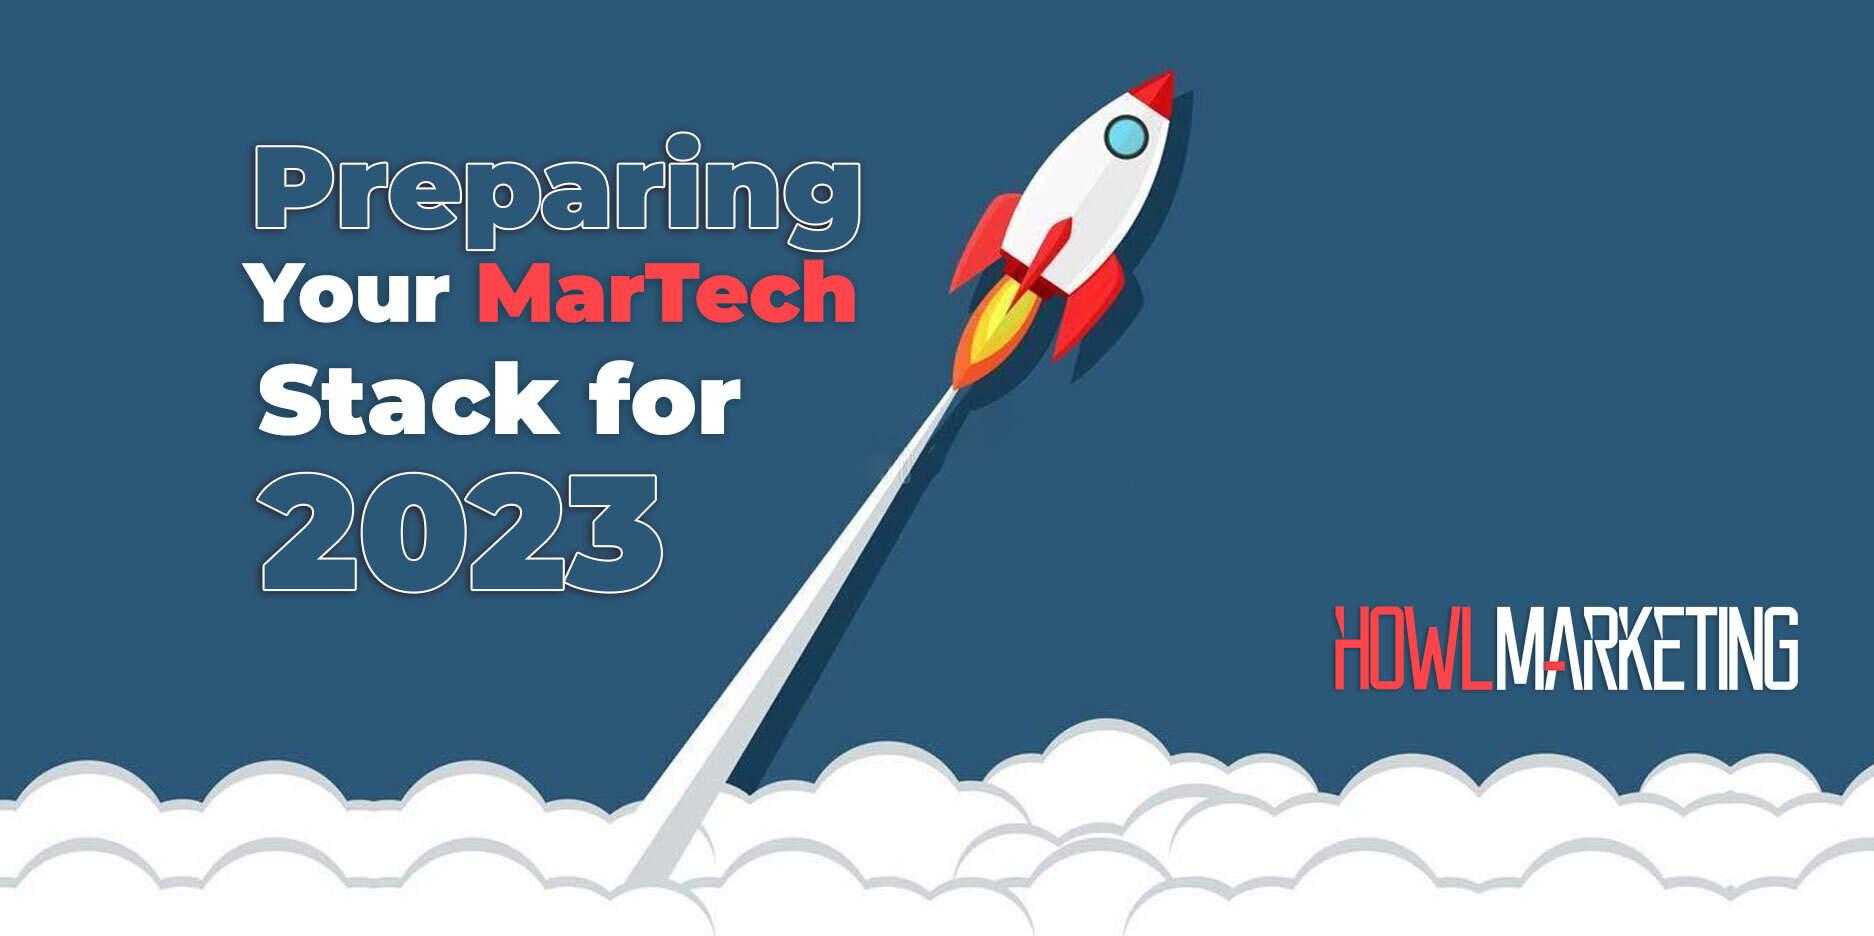 Preparing Your MarTech Stack for 2023